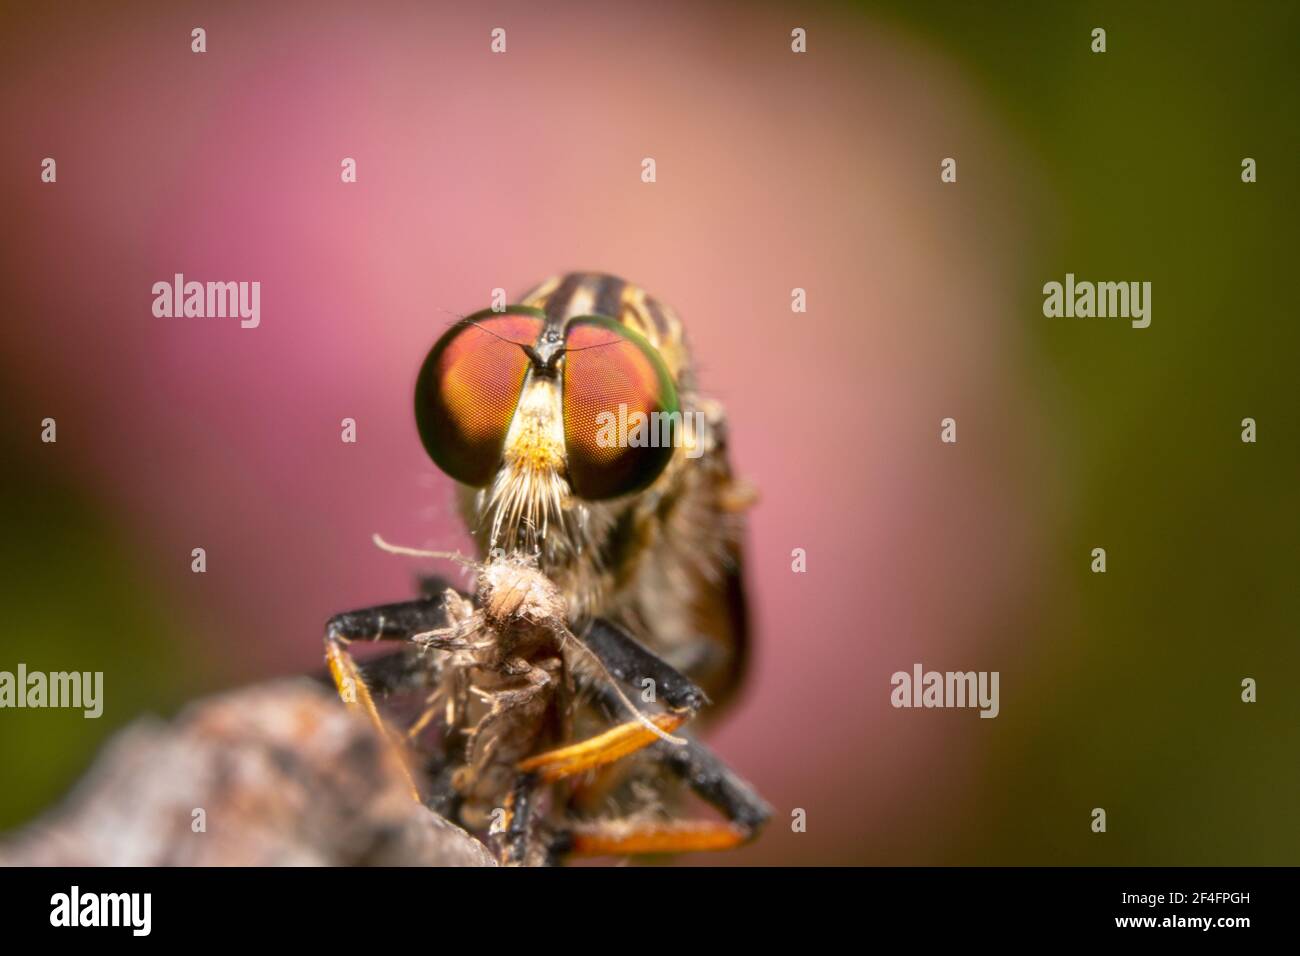 Glowing pink background behind a colourful robber fly with orange legs Stock Photo